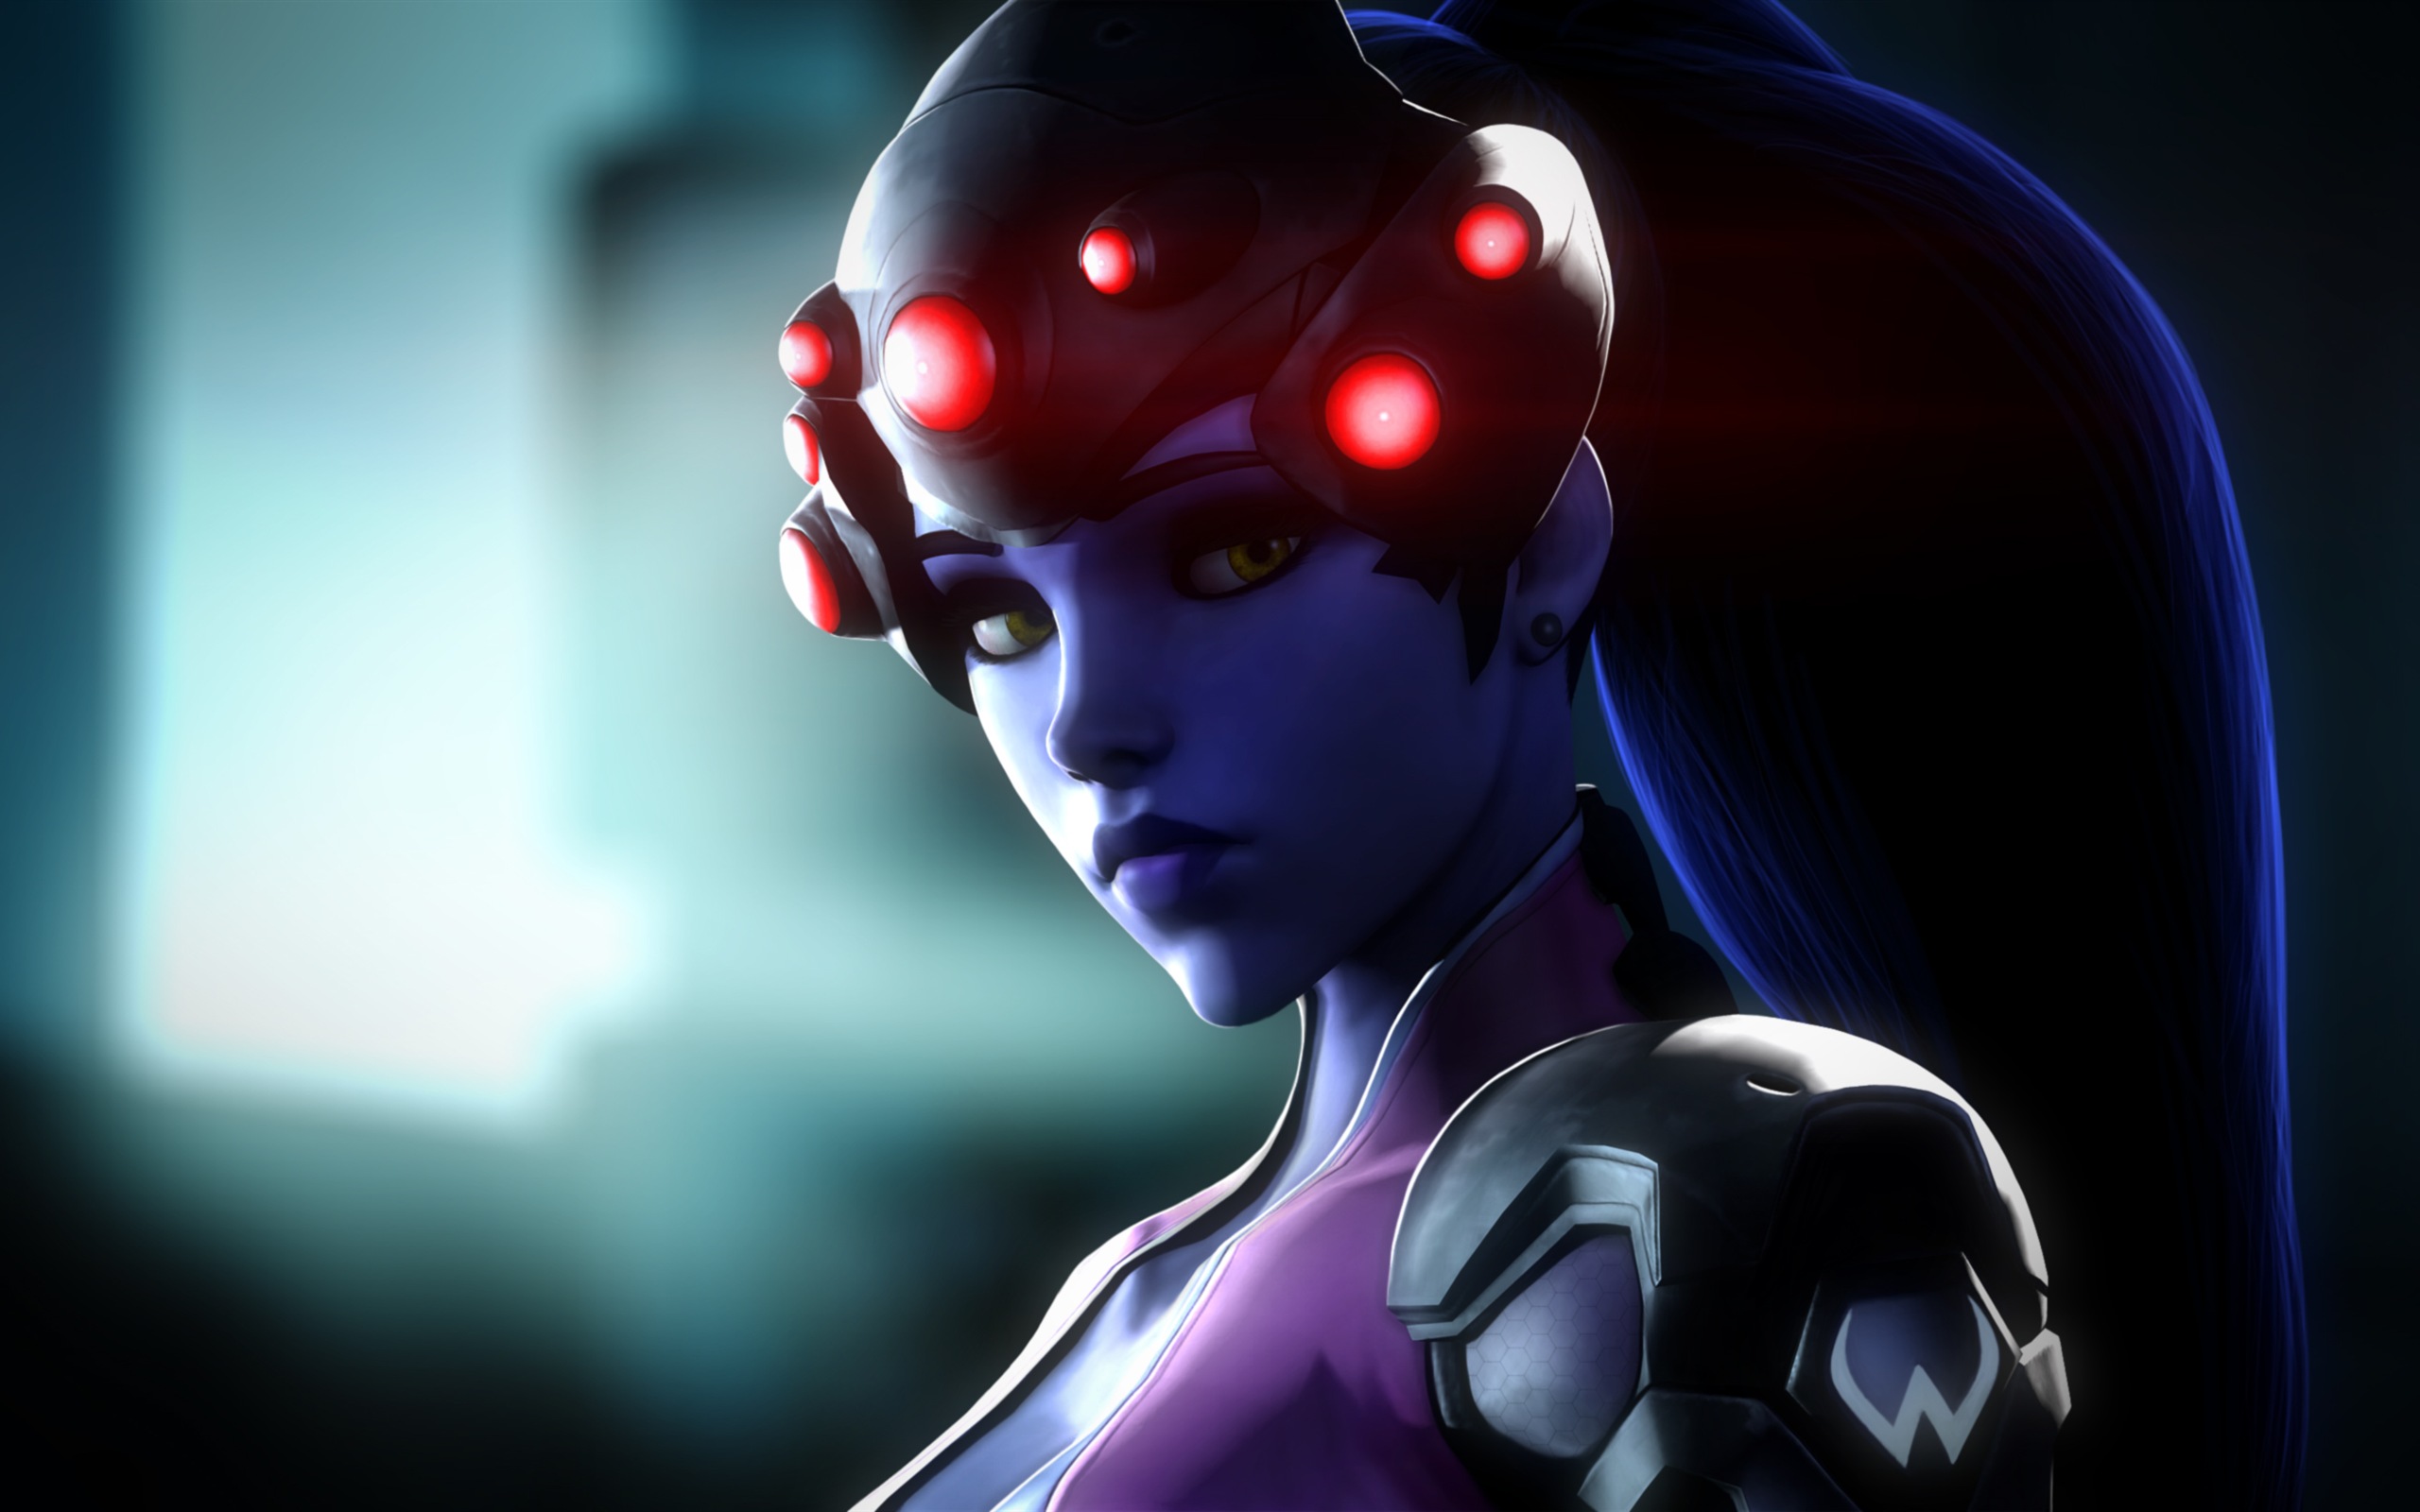 Overwatch, hot game HD wallpapers #9 - 2560x1600